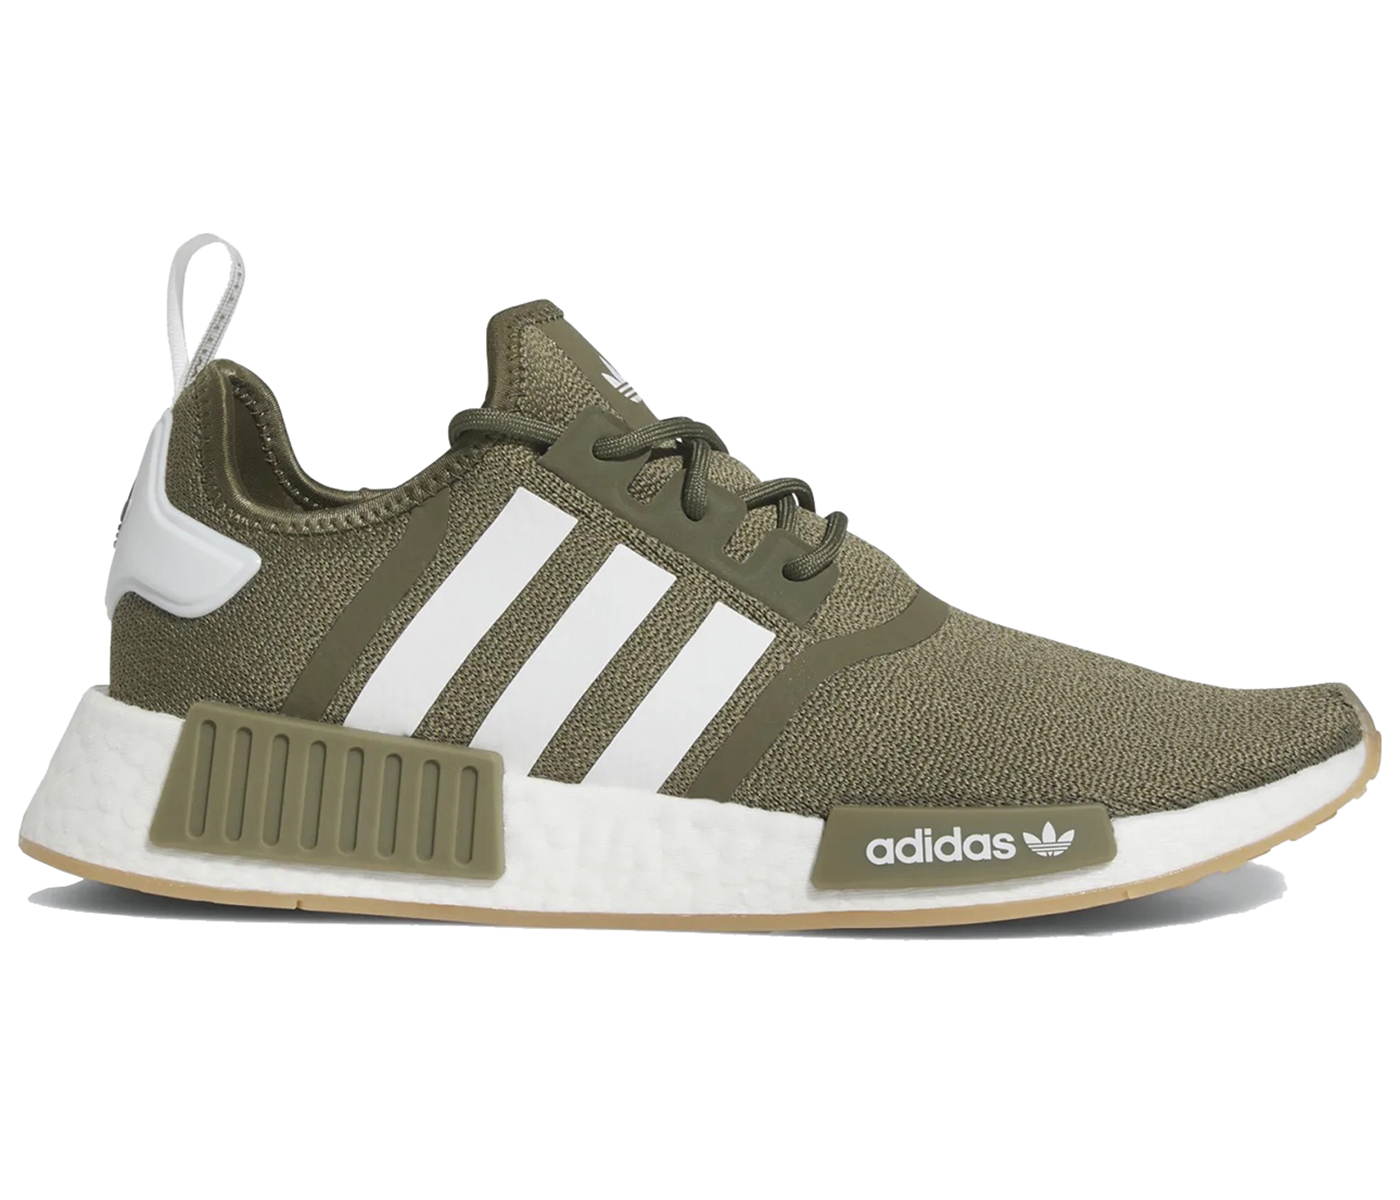 adidas NMD R1 Olive Strata Men's - IE2278 - US